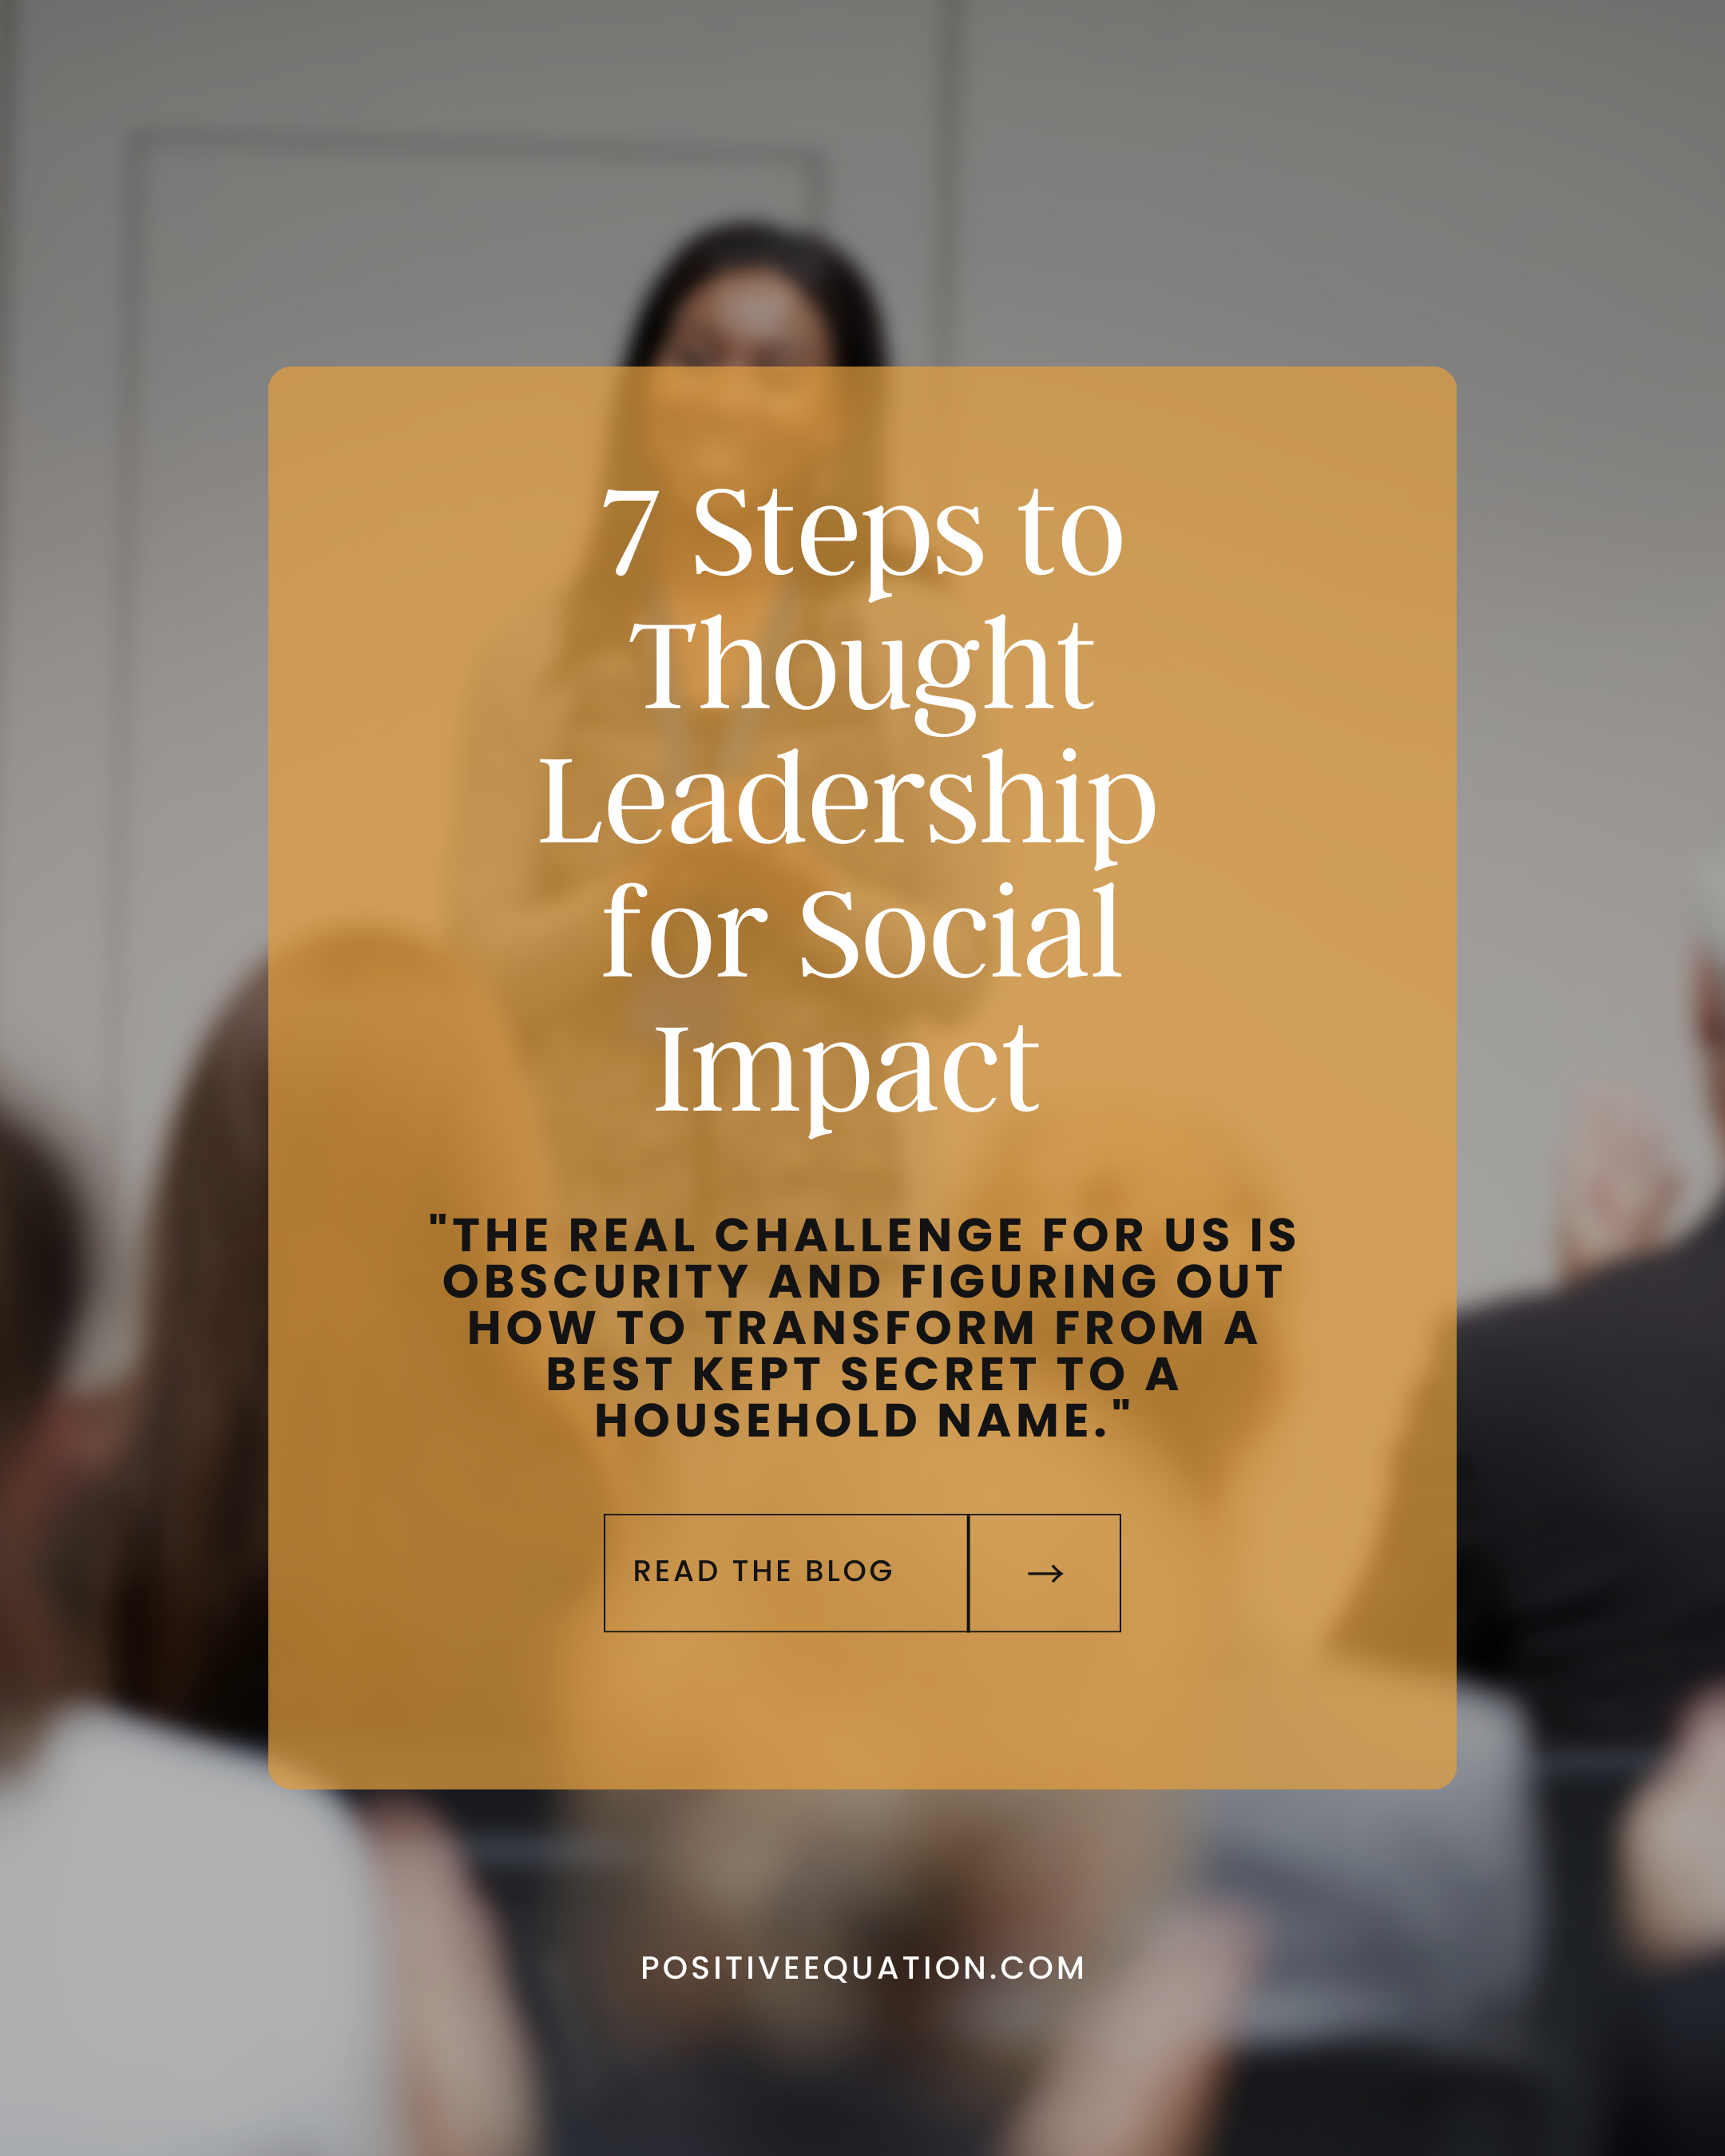 7 Steps to Thought Leadership for Social Impact